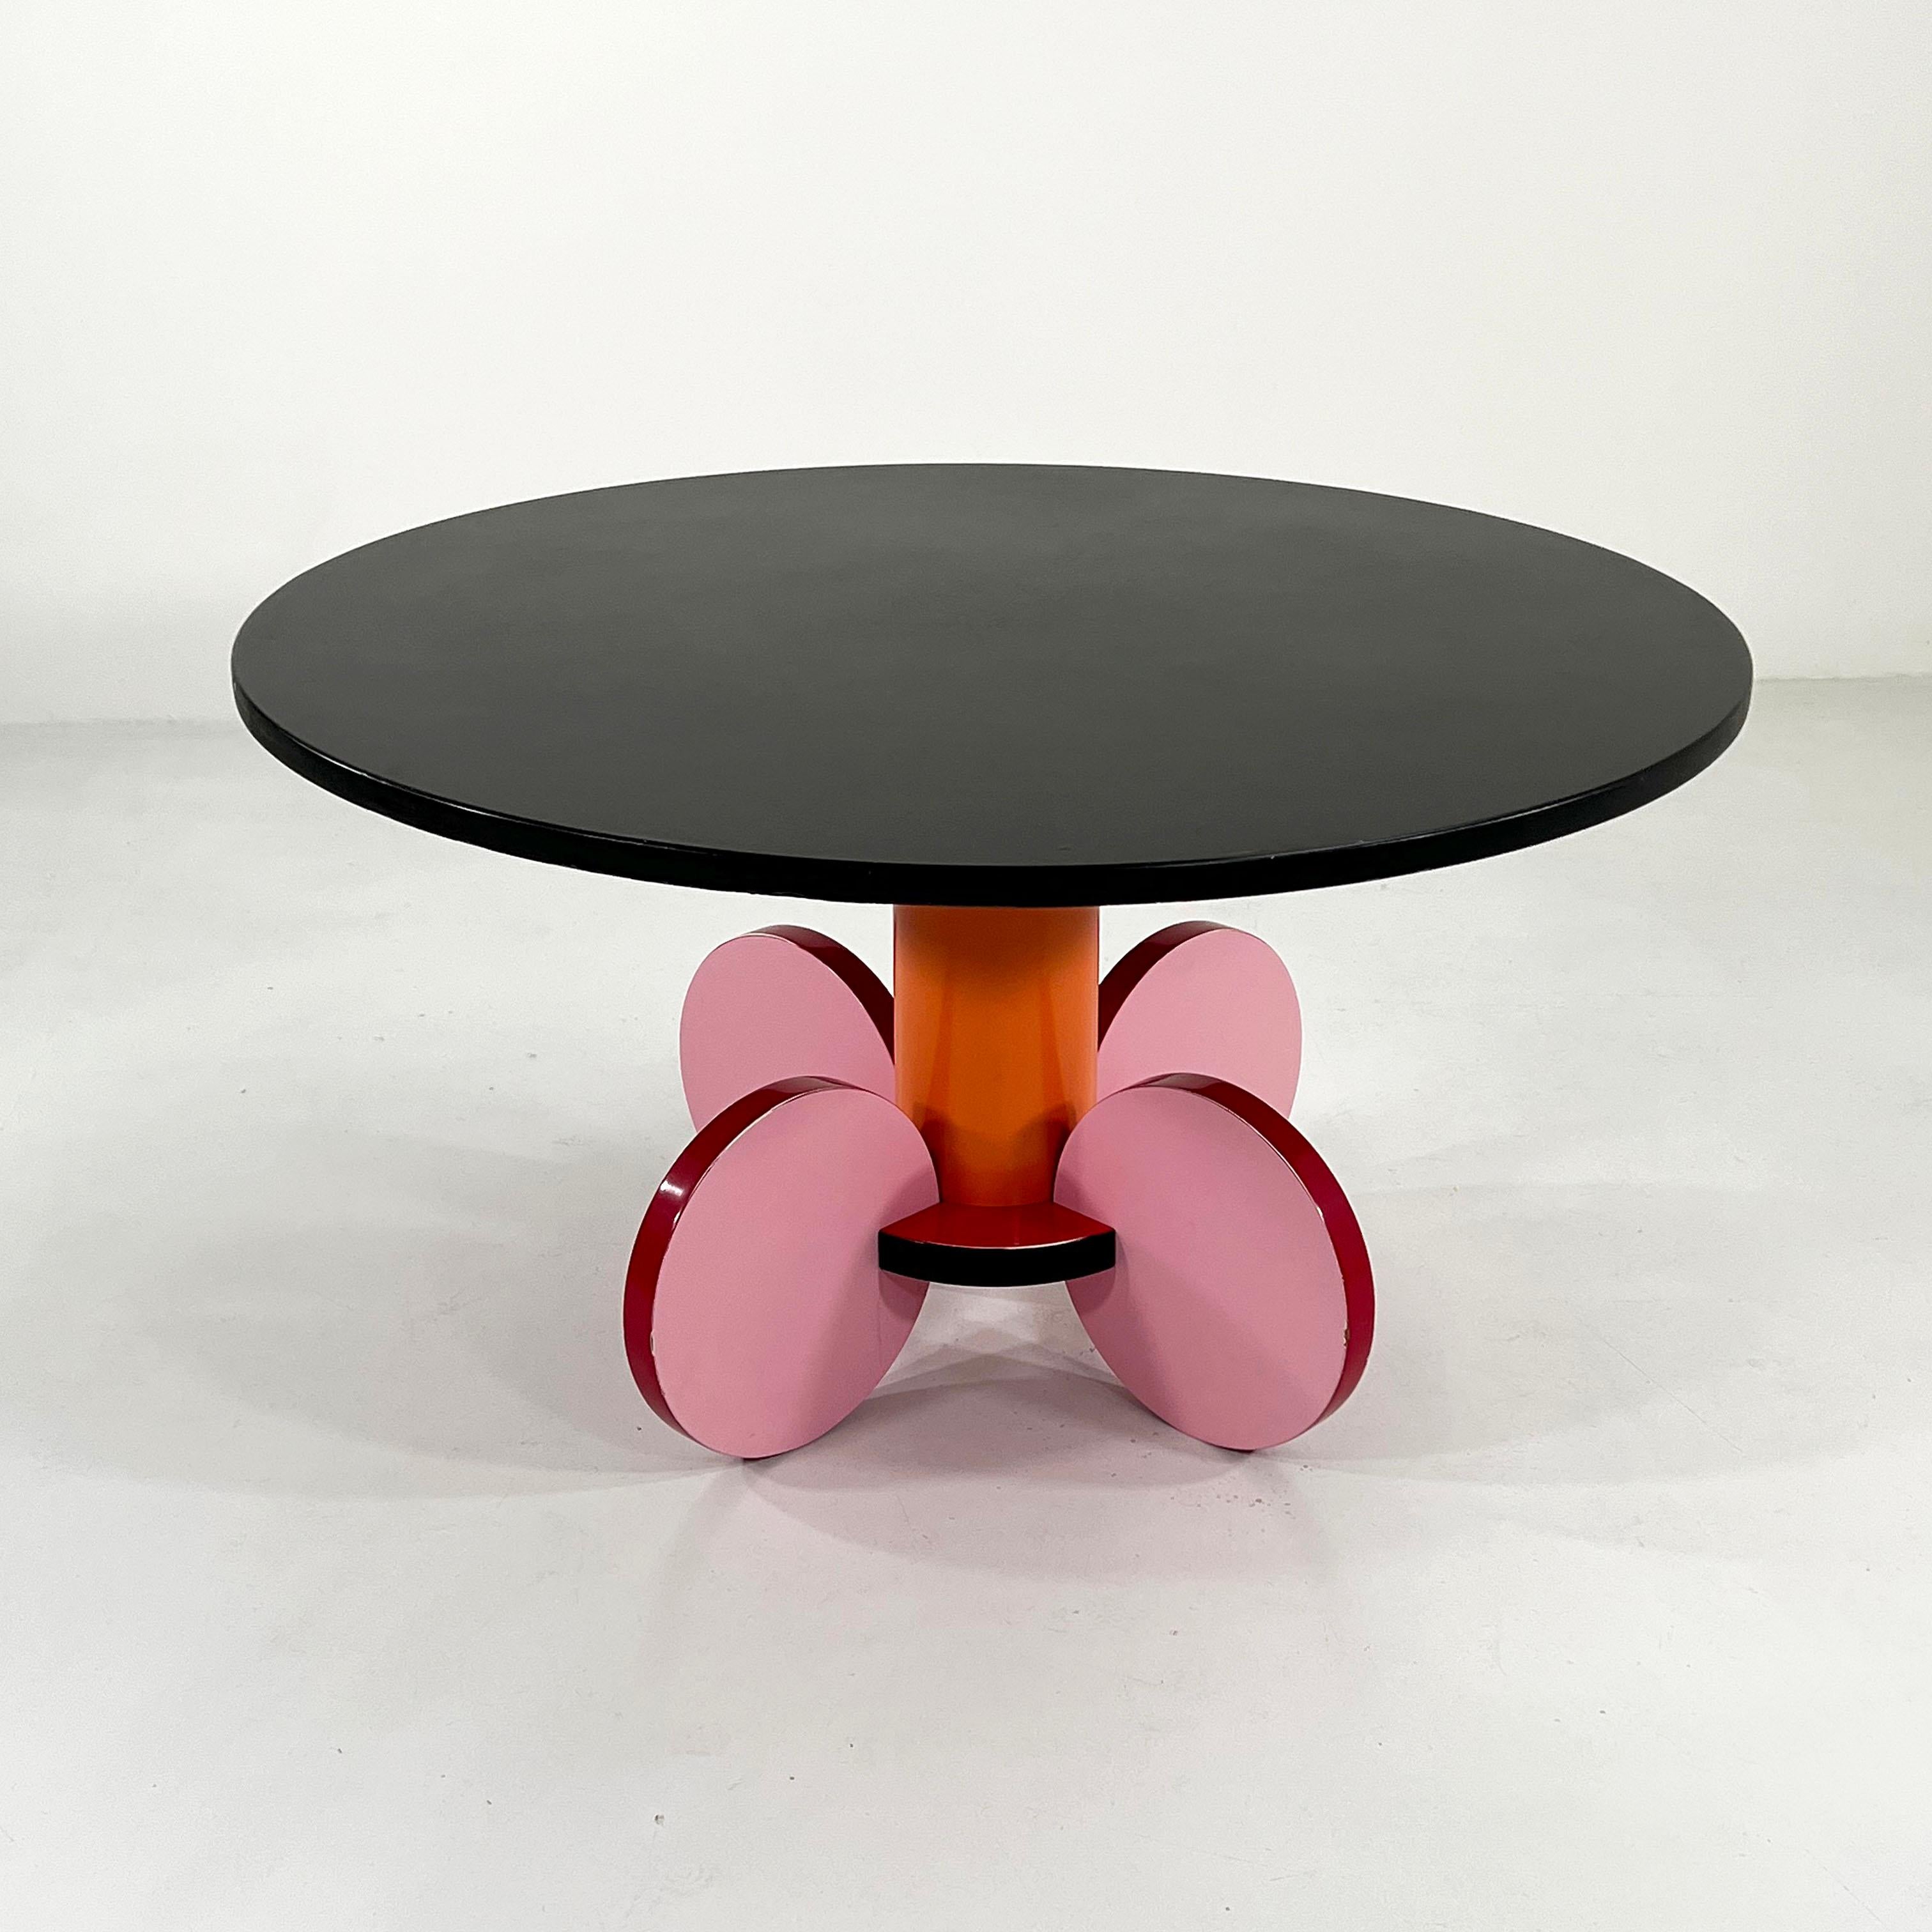 Designer - Michele De Lucchi
Model - La Festa Dining Table
Design Period - Eighties
Measurements - Width 130 cm x Depth 130 cm x Height 73 cm
Materials - Laminated Wood
Color - Back, Orange, Pink, Burgundy
Light wear consistent with age and use.